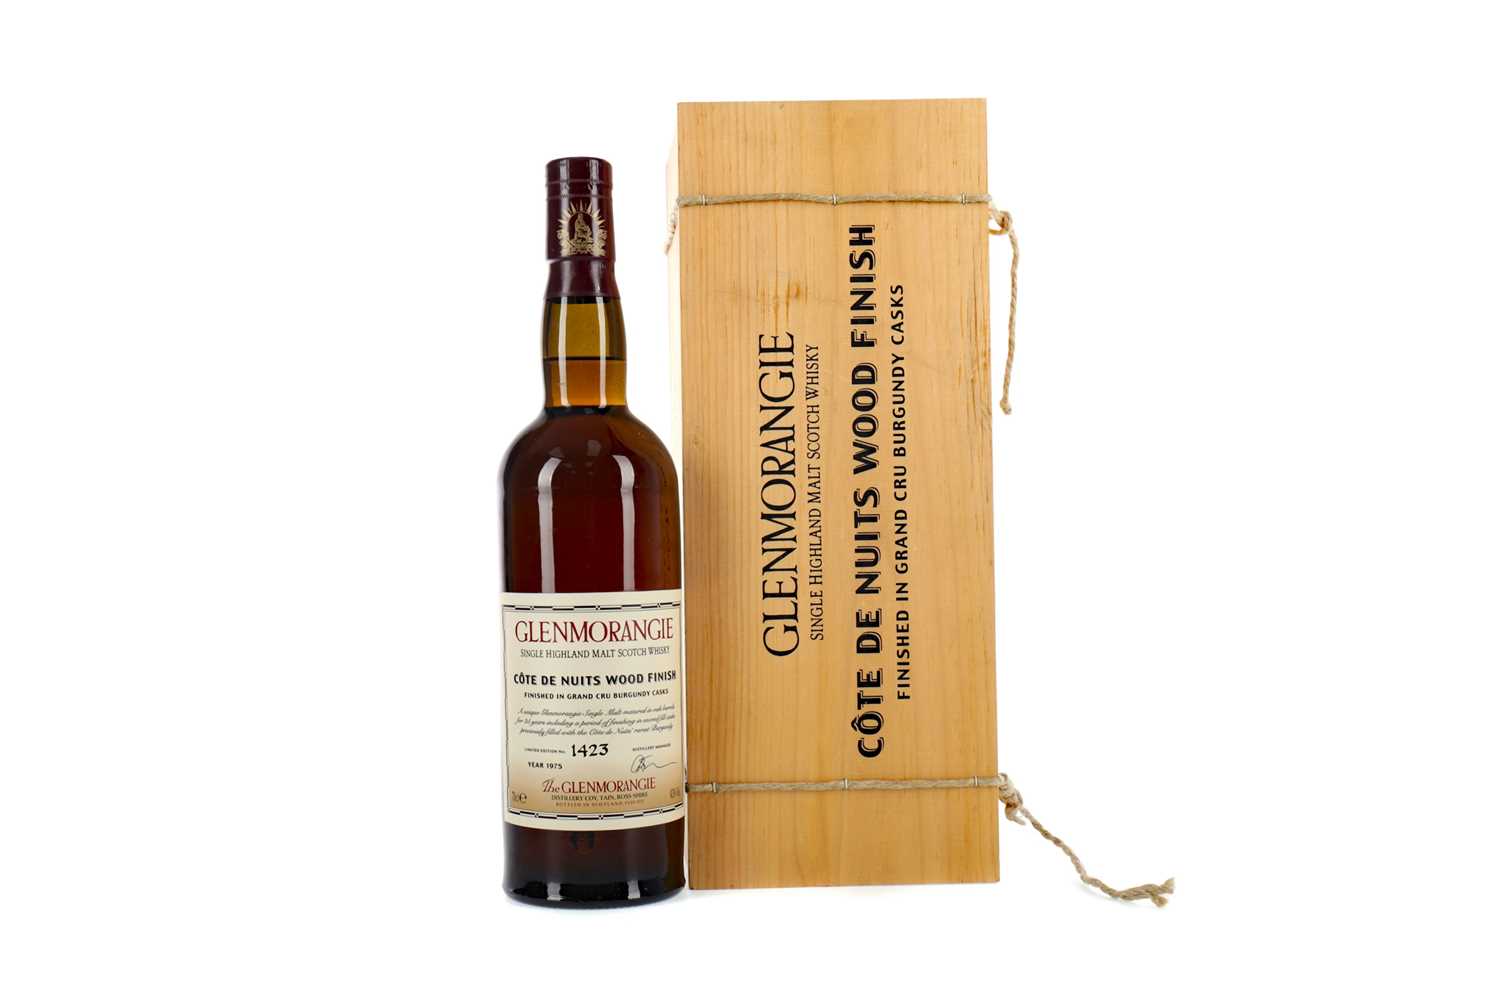 Lot 271 - GLENMORANGIE 1975 COTES DE NUITS AGED OVER 25 YEARS